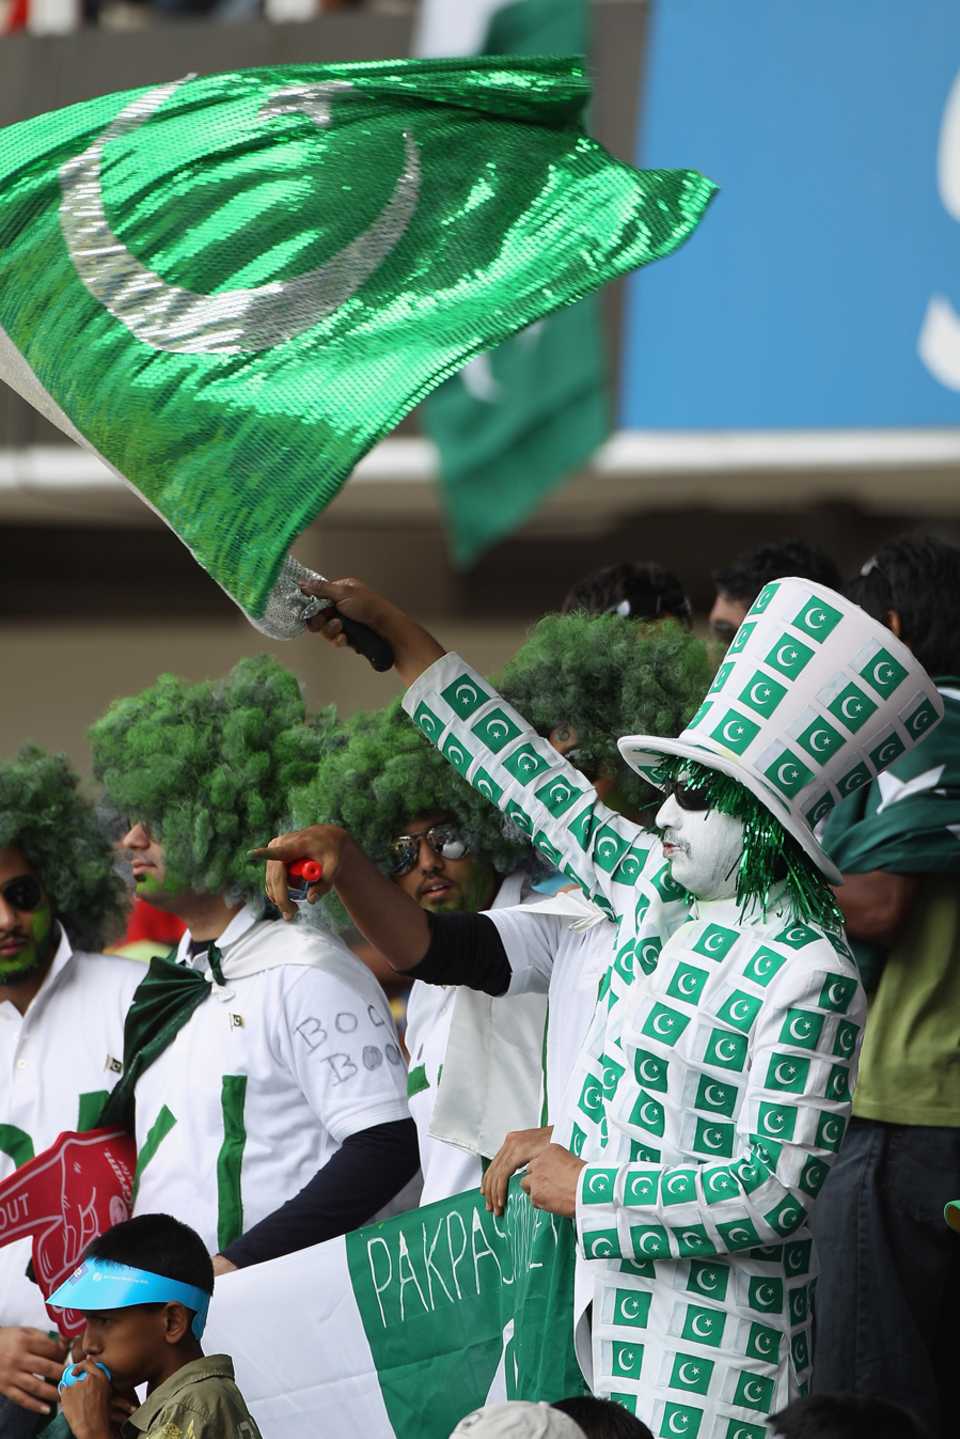 A Pakistan fan brightens things up in the stands